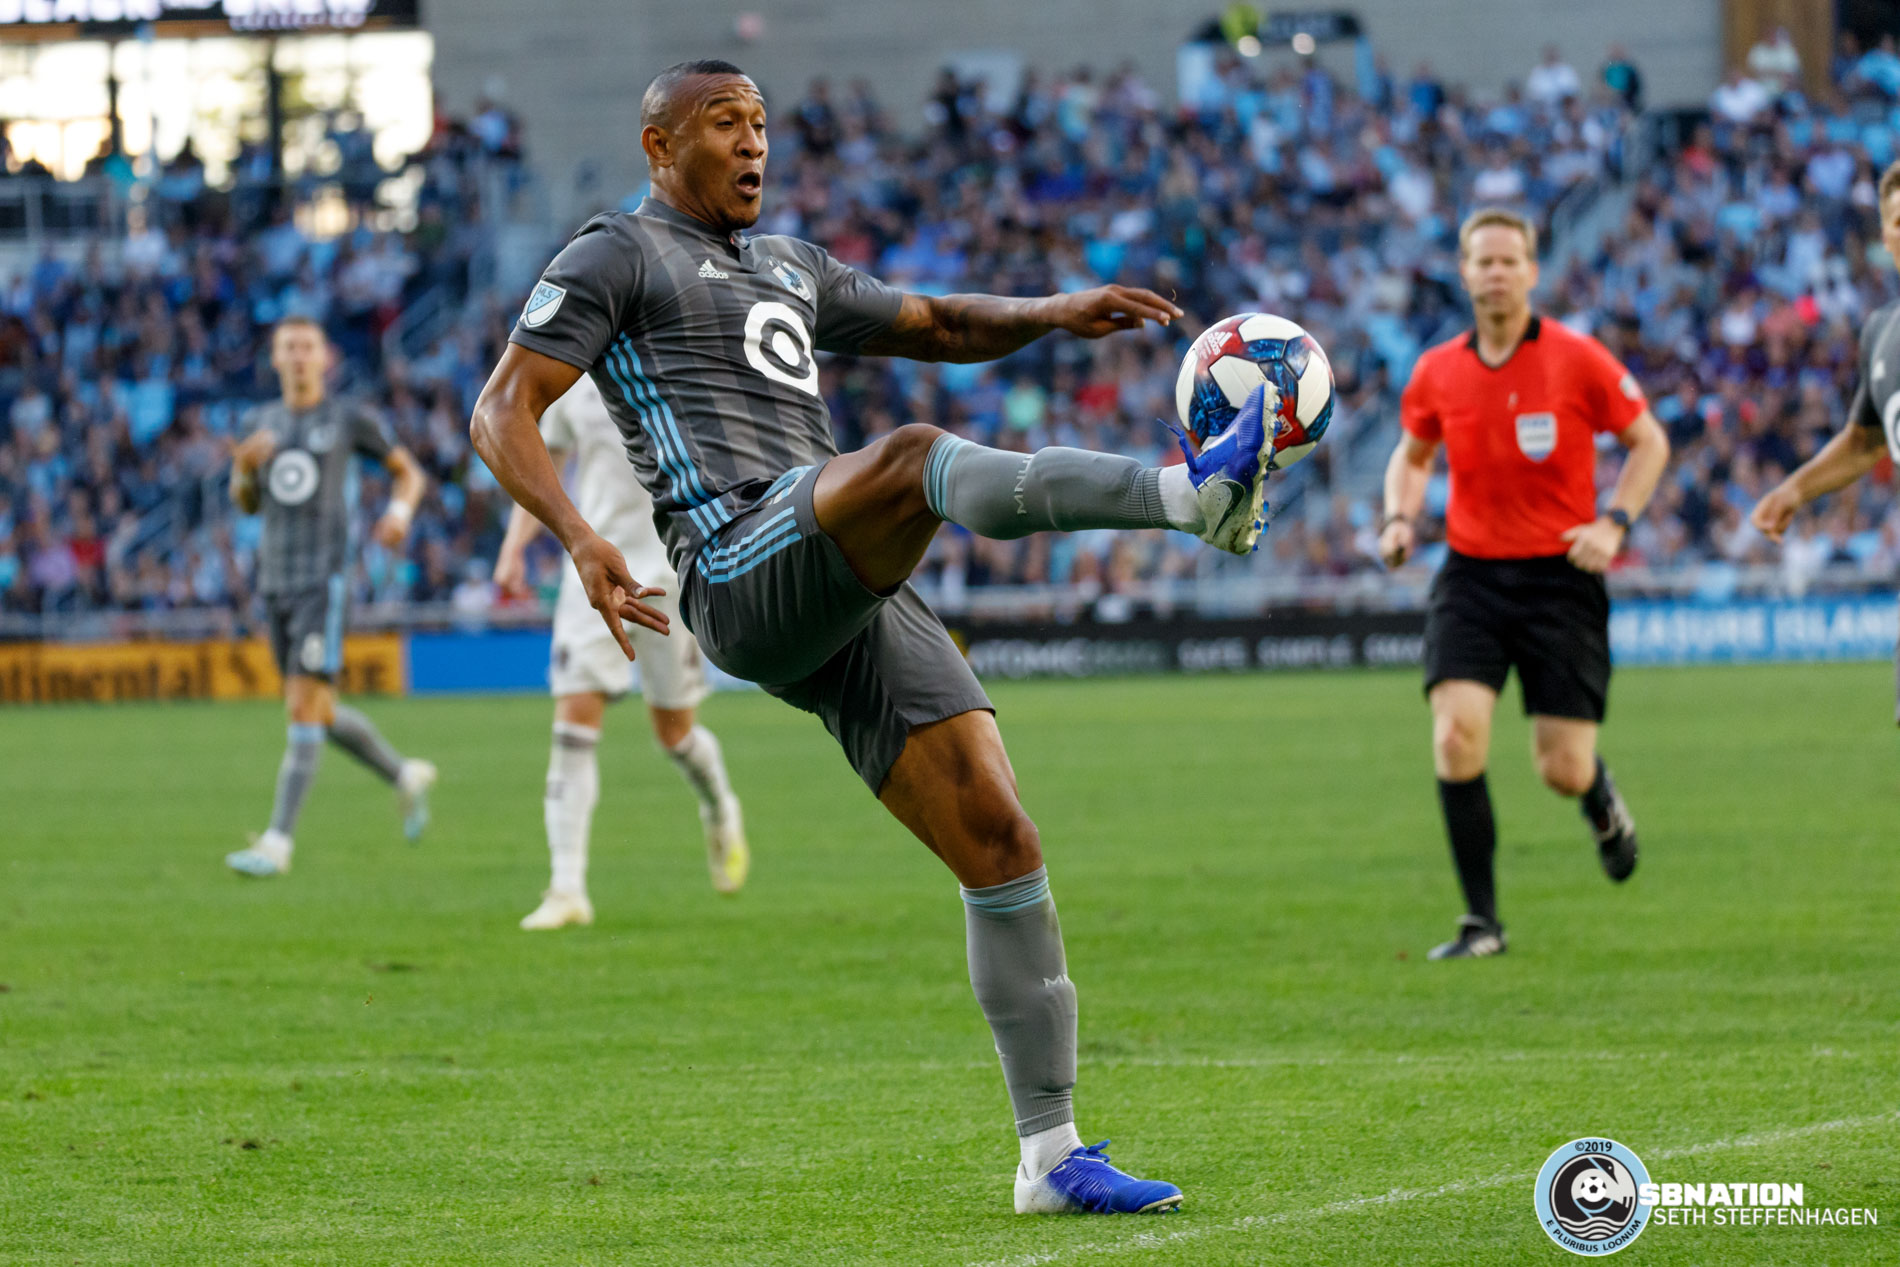 August 14, 2019 - Saint Paul, Minnesota, United States - Minnesota United forward Angelo Rodriguez (9) controls the ball during the match against the Colorado Rapids at Allianz Field. 
